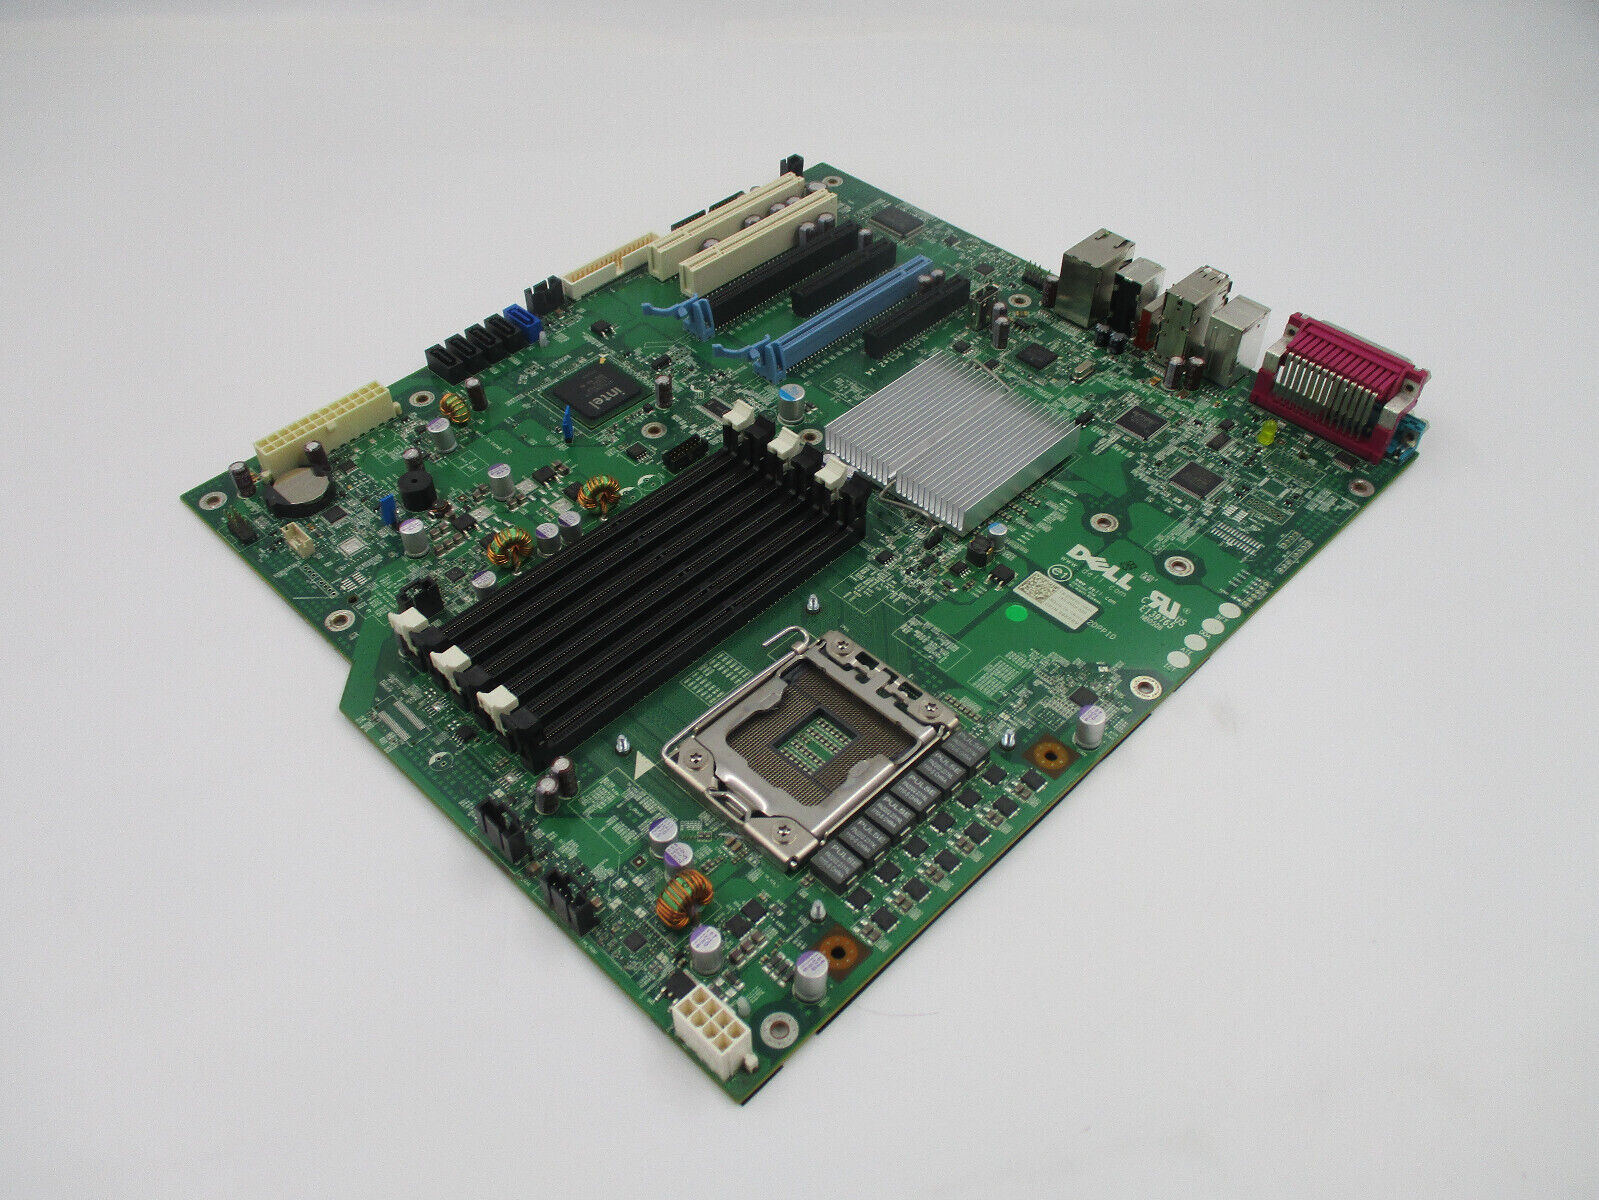 Dell Precision T3500 Motherboard LGA1366 DDR3 Dell P/N: 09KPNV Tested Working